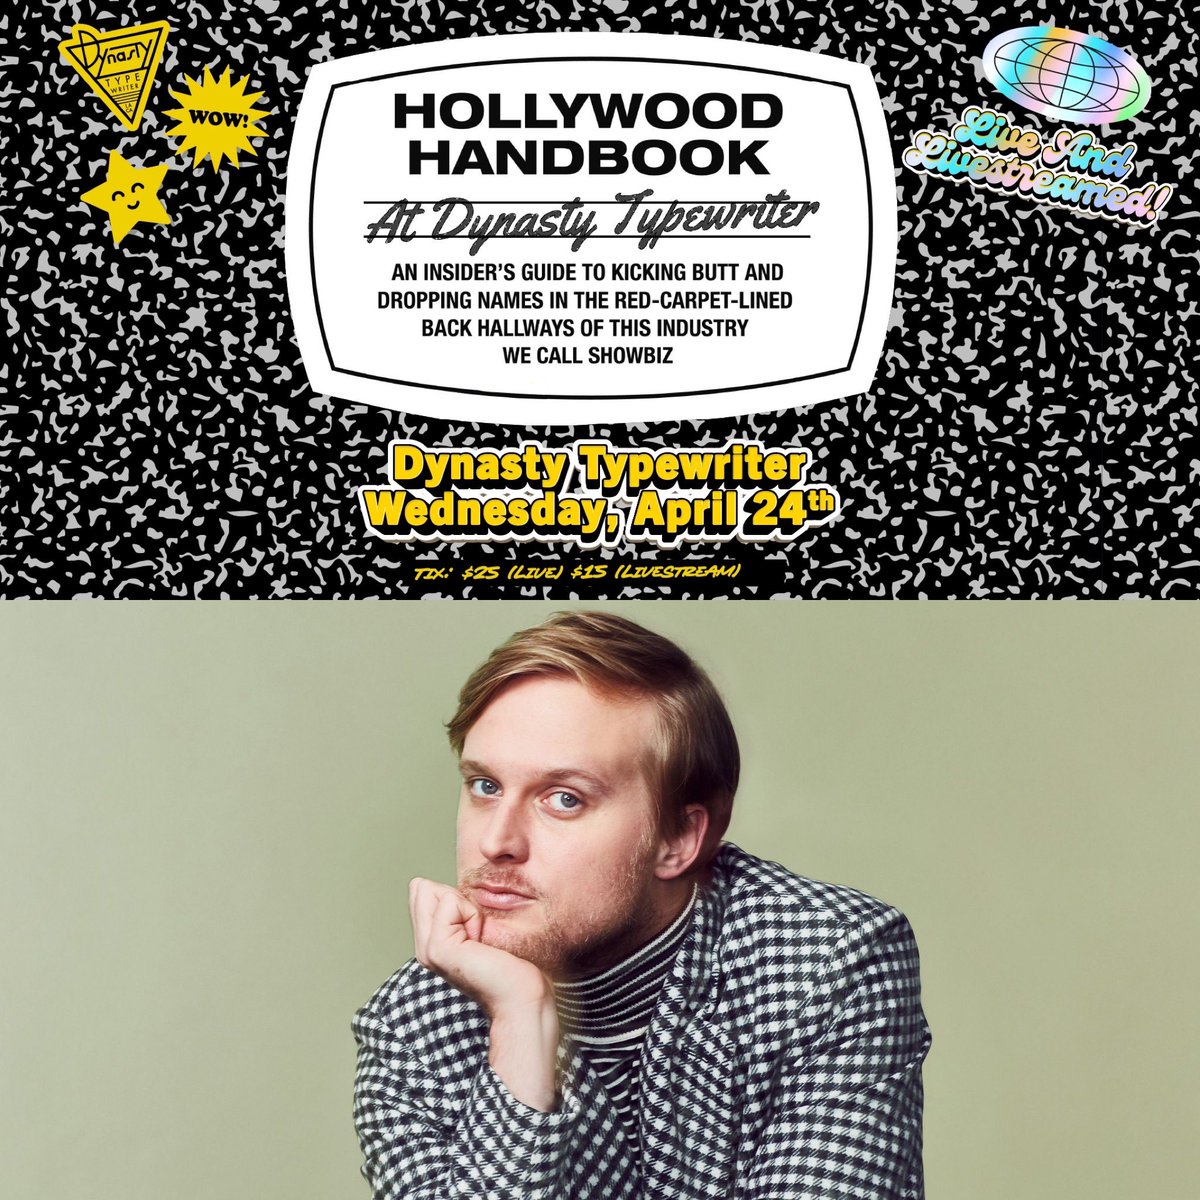 Tonight! Don’t miss Hollywood Handbook live and livestreaming at Dynasty Typewriter with guest John Early @bejohnce In-person and streaming tickets are available now. squadup.com/events/hollywo… @SeanClements @hayesdavenport